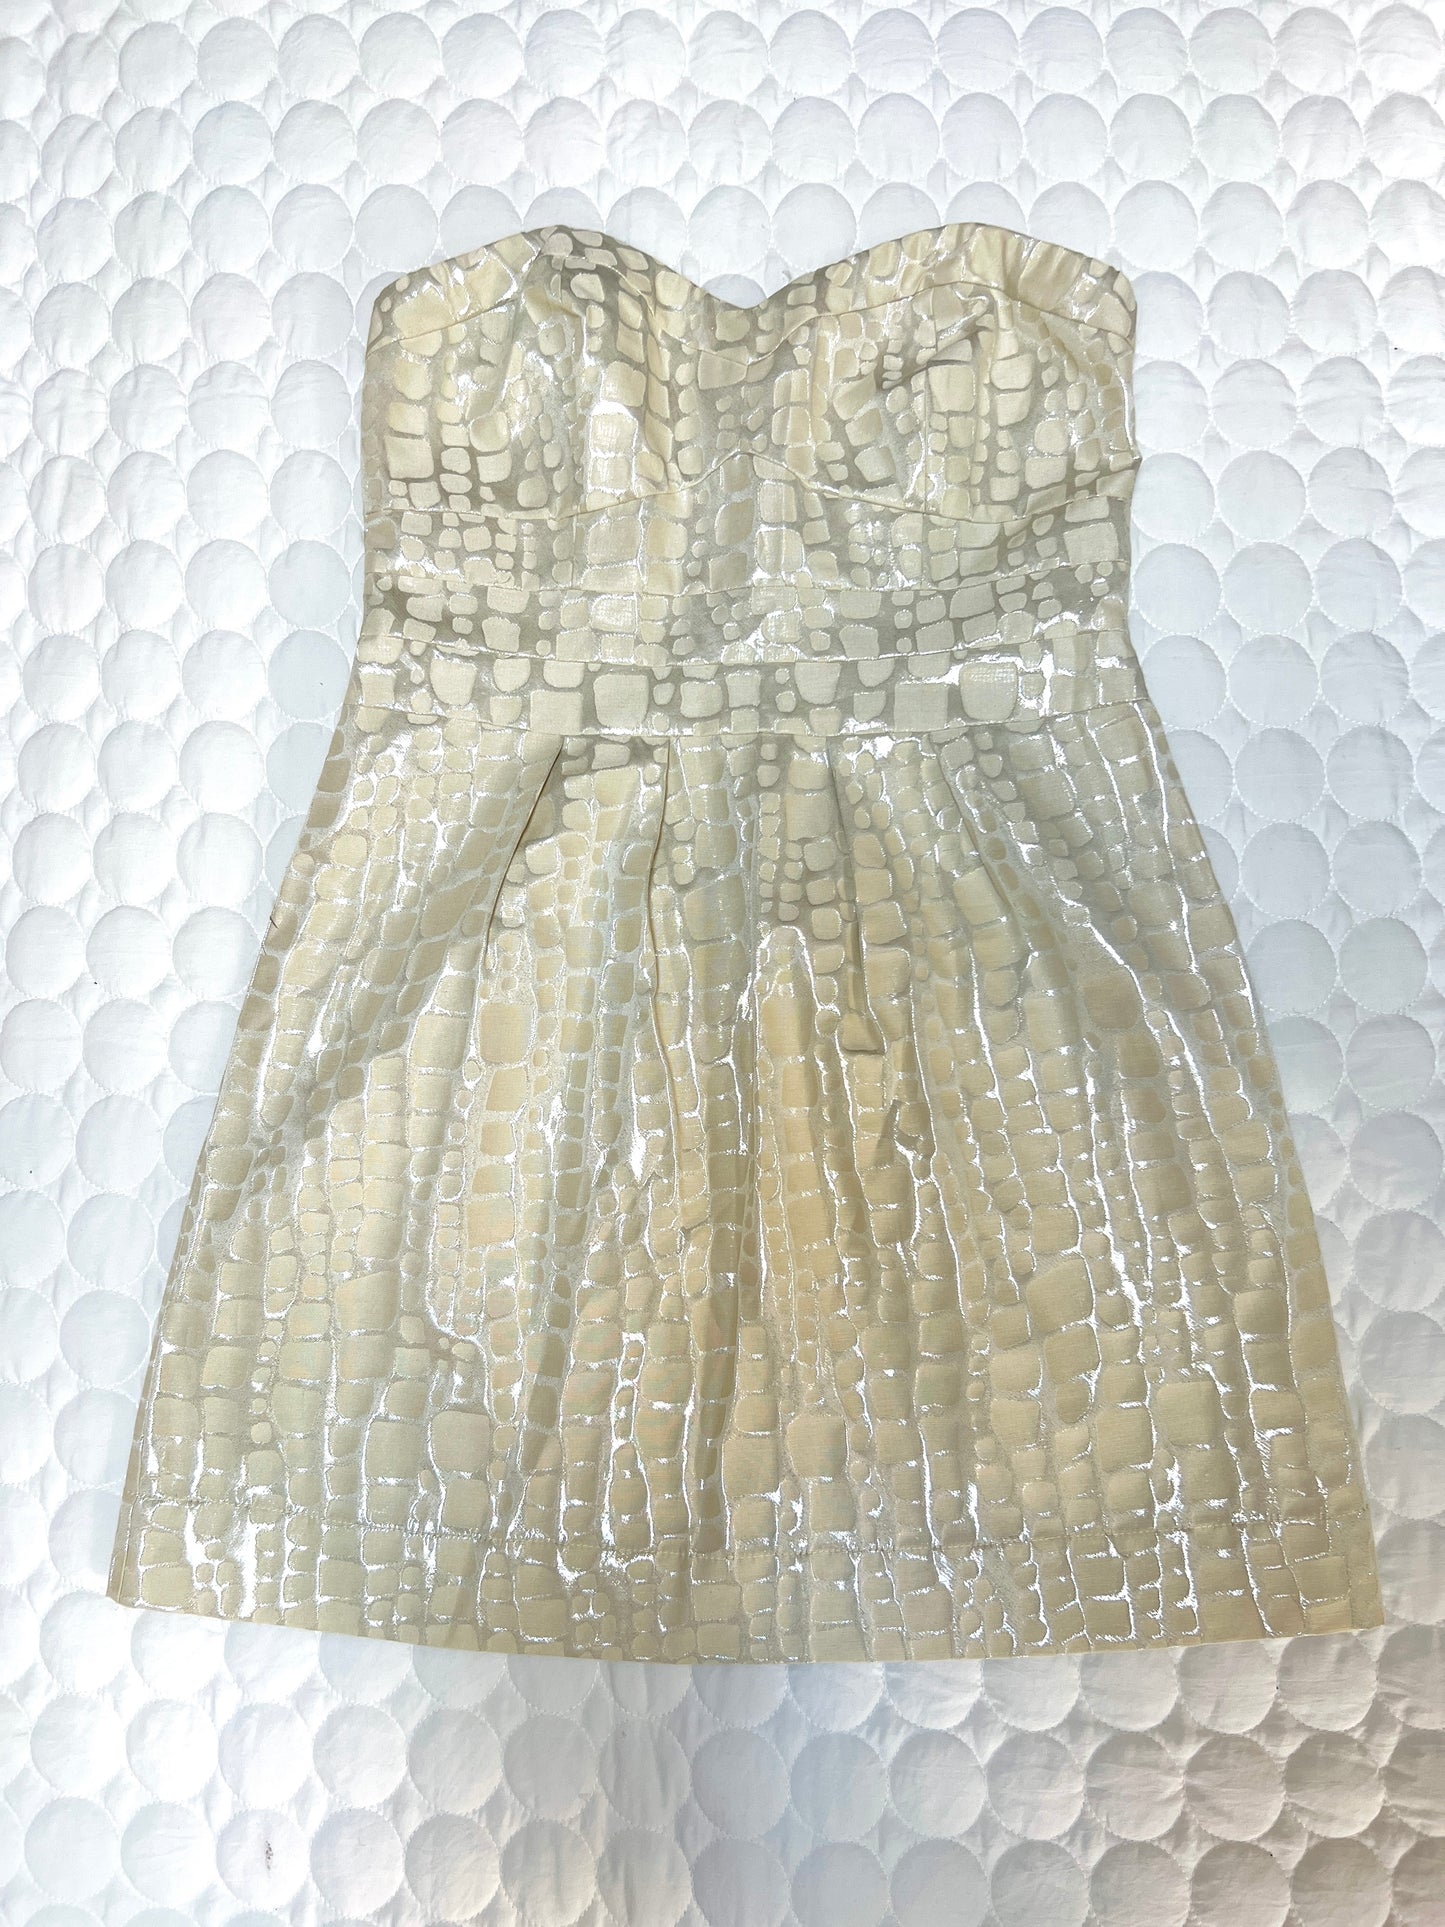 Size 12 American Eagle strapless dress, cream with silver shimmer. New without tags. Exposed zipper on back. $10